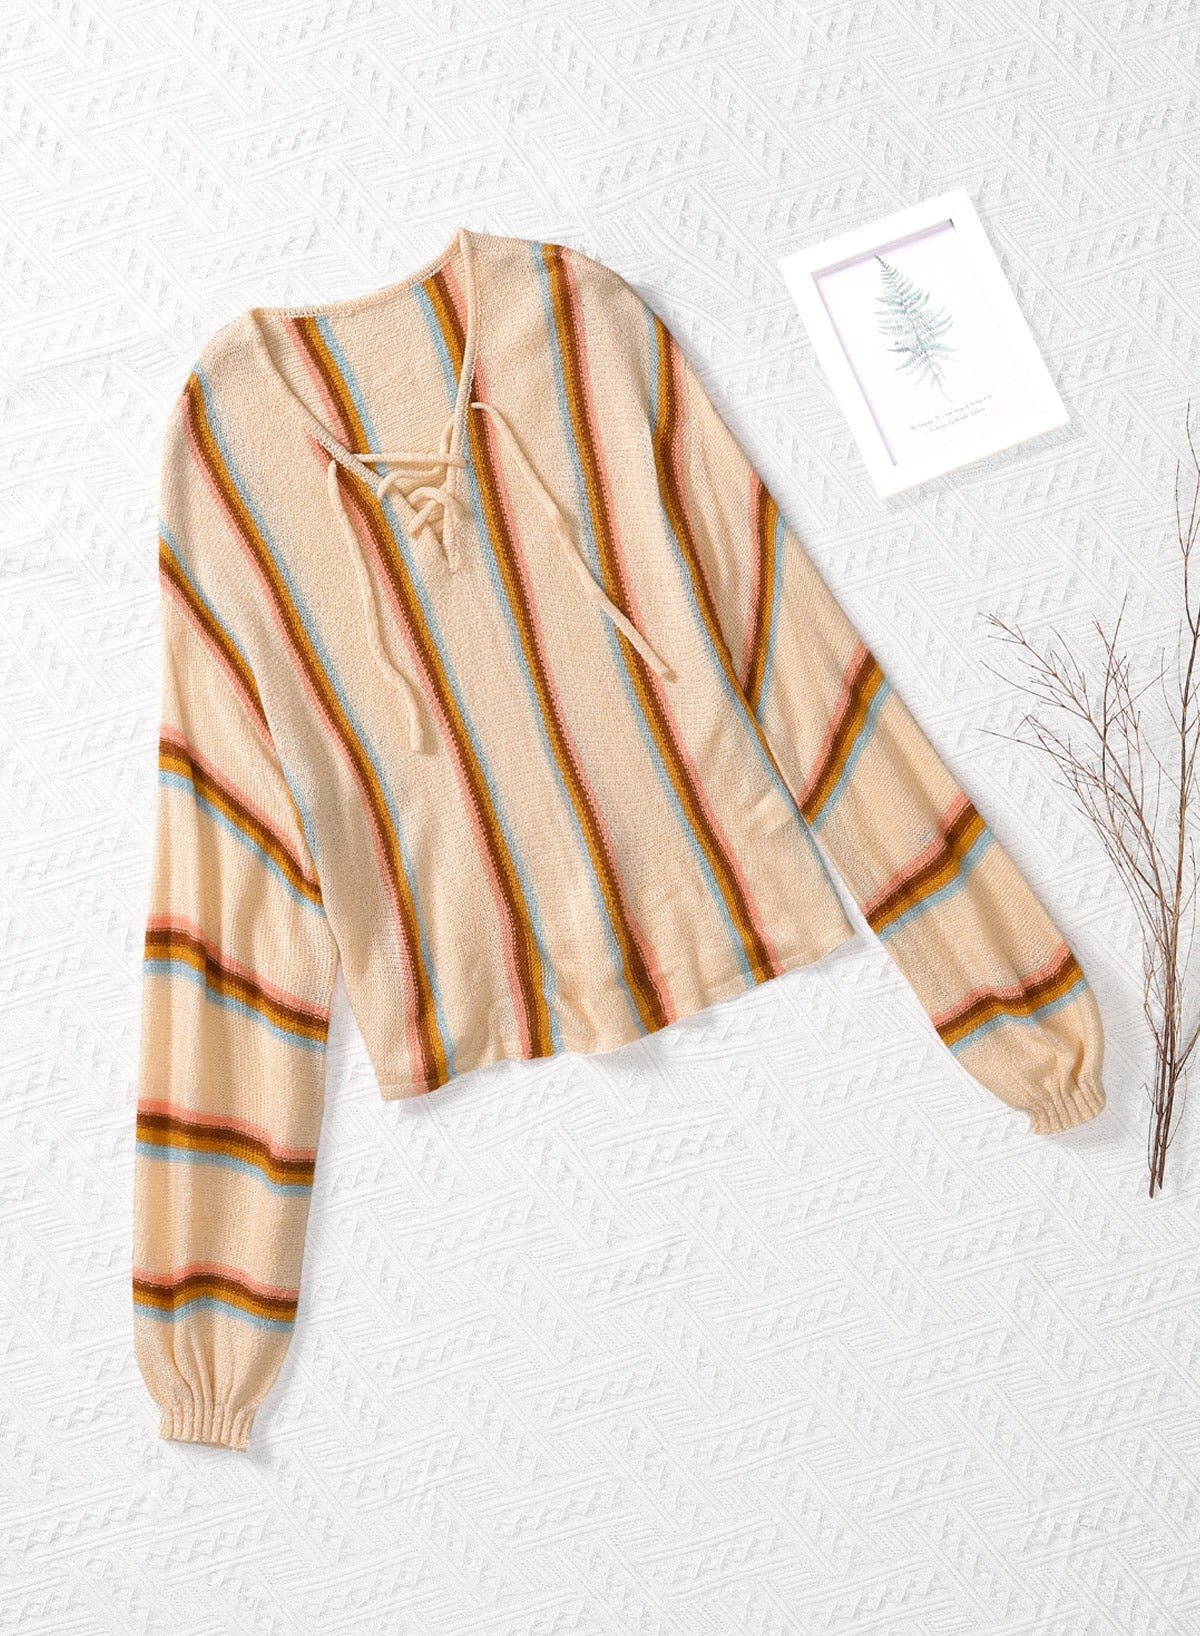 Striped Lace-Up Knit Top - Ziemay